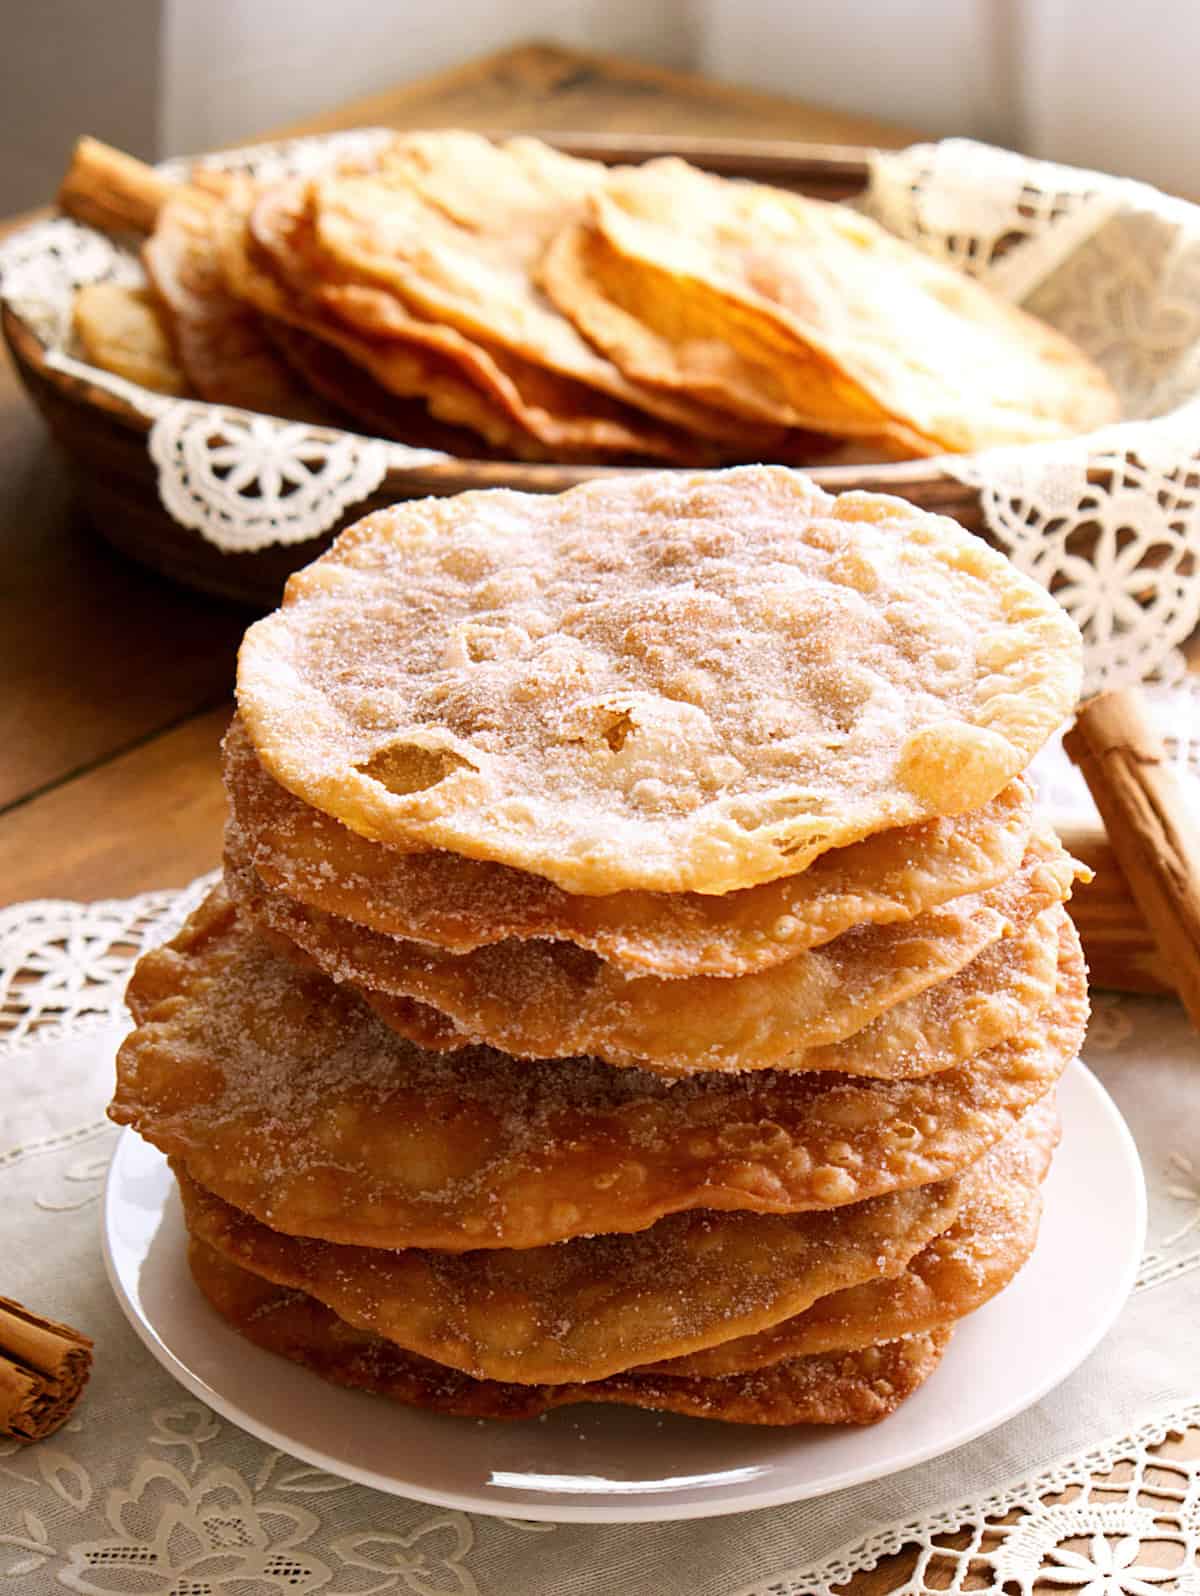 stack of golden, crisp Mexican buñuelos on a wooden table with lace doilies.